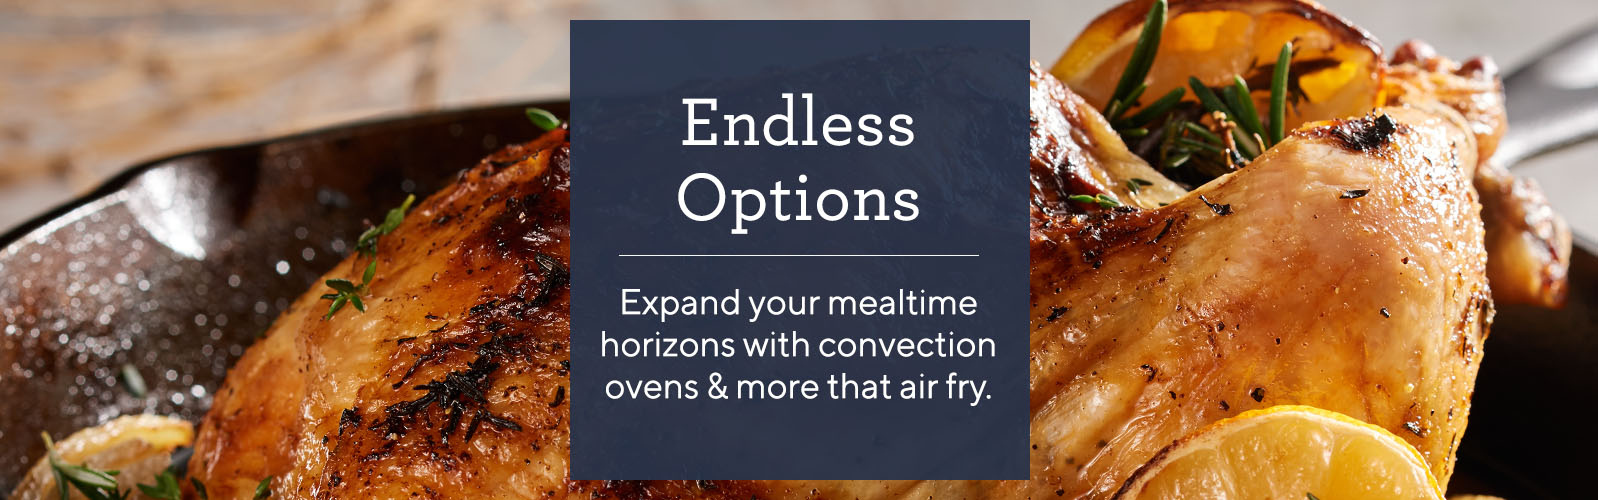 Endless Options.  Expand your mealtime horizons with convection ovens & more that air fry.